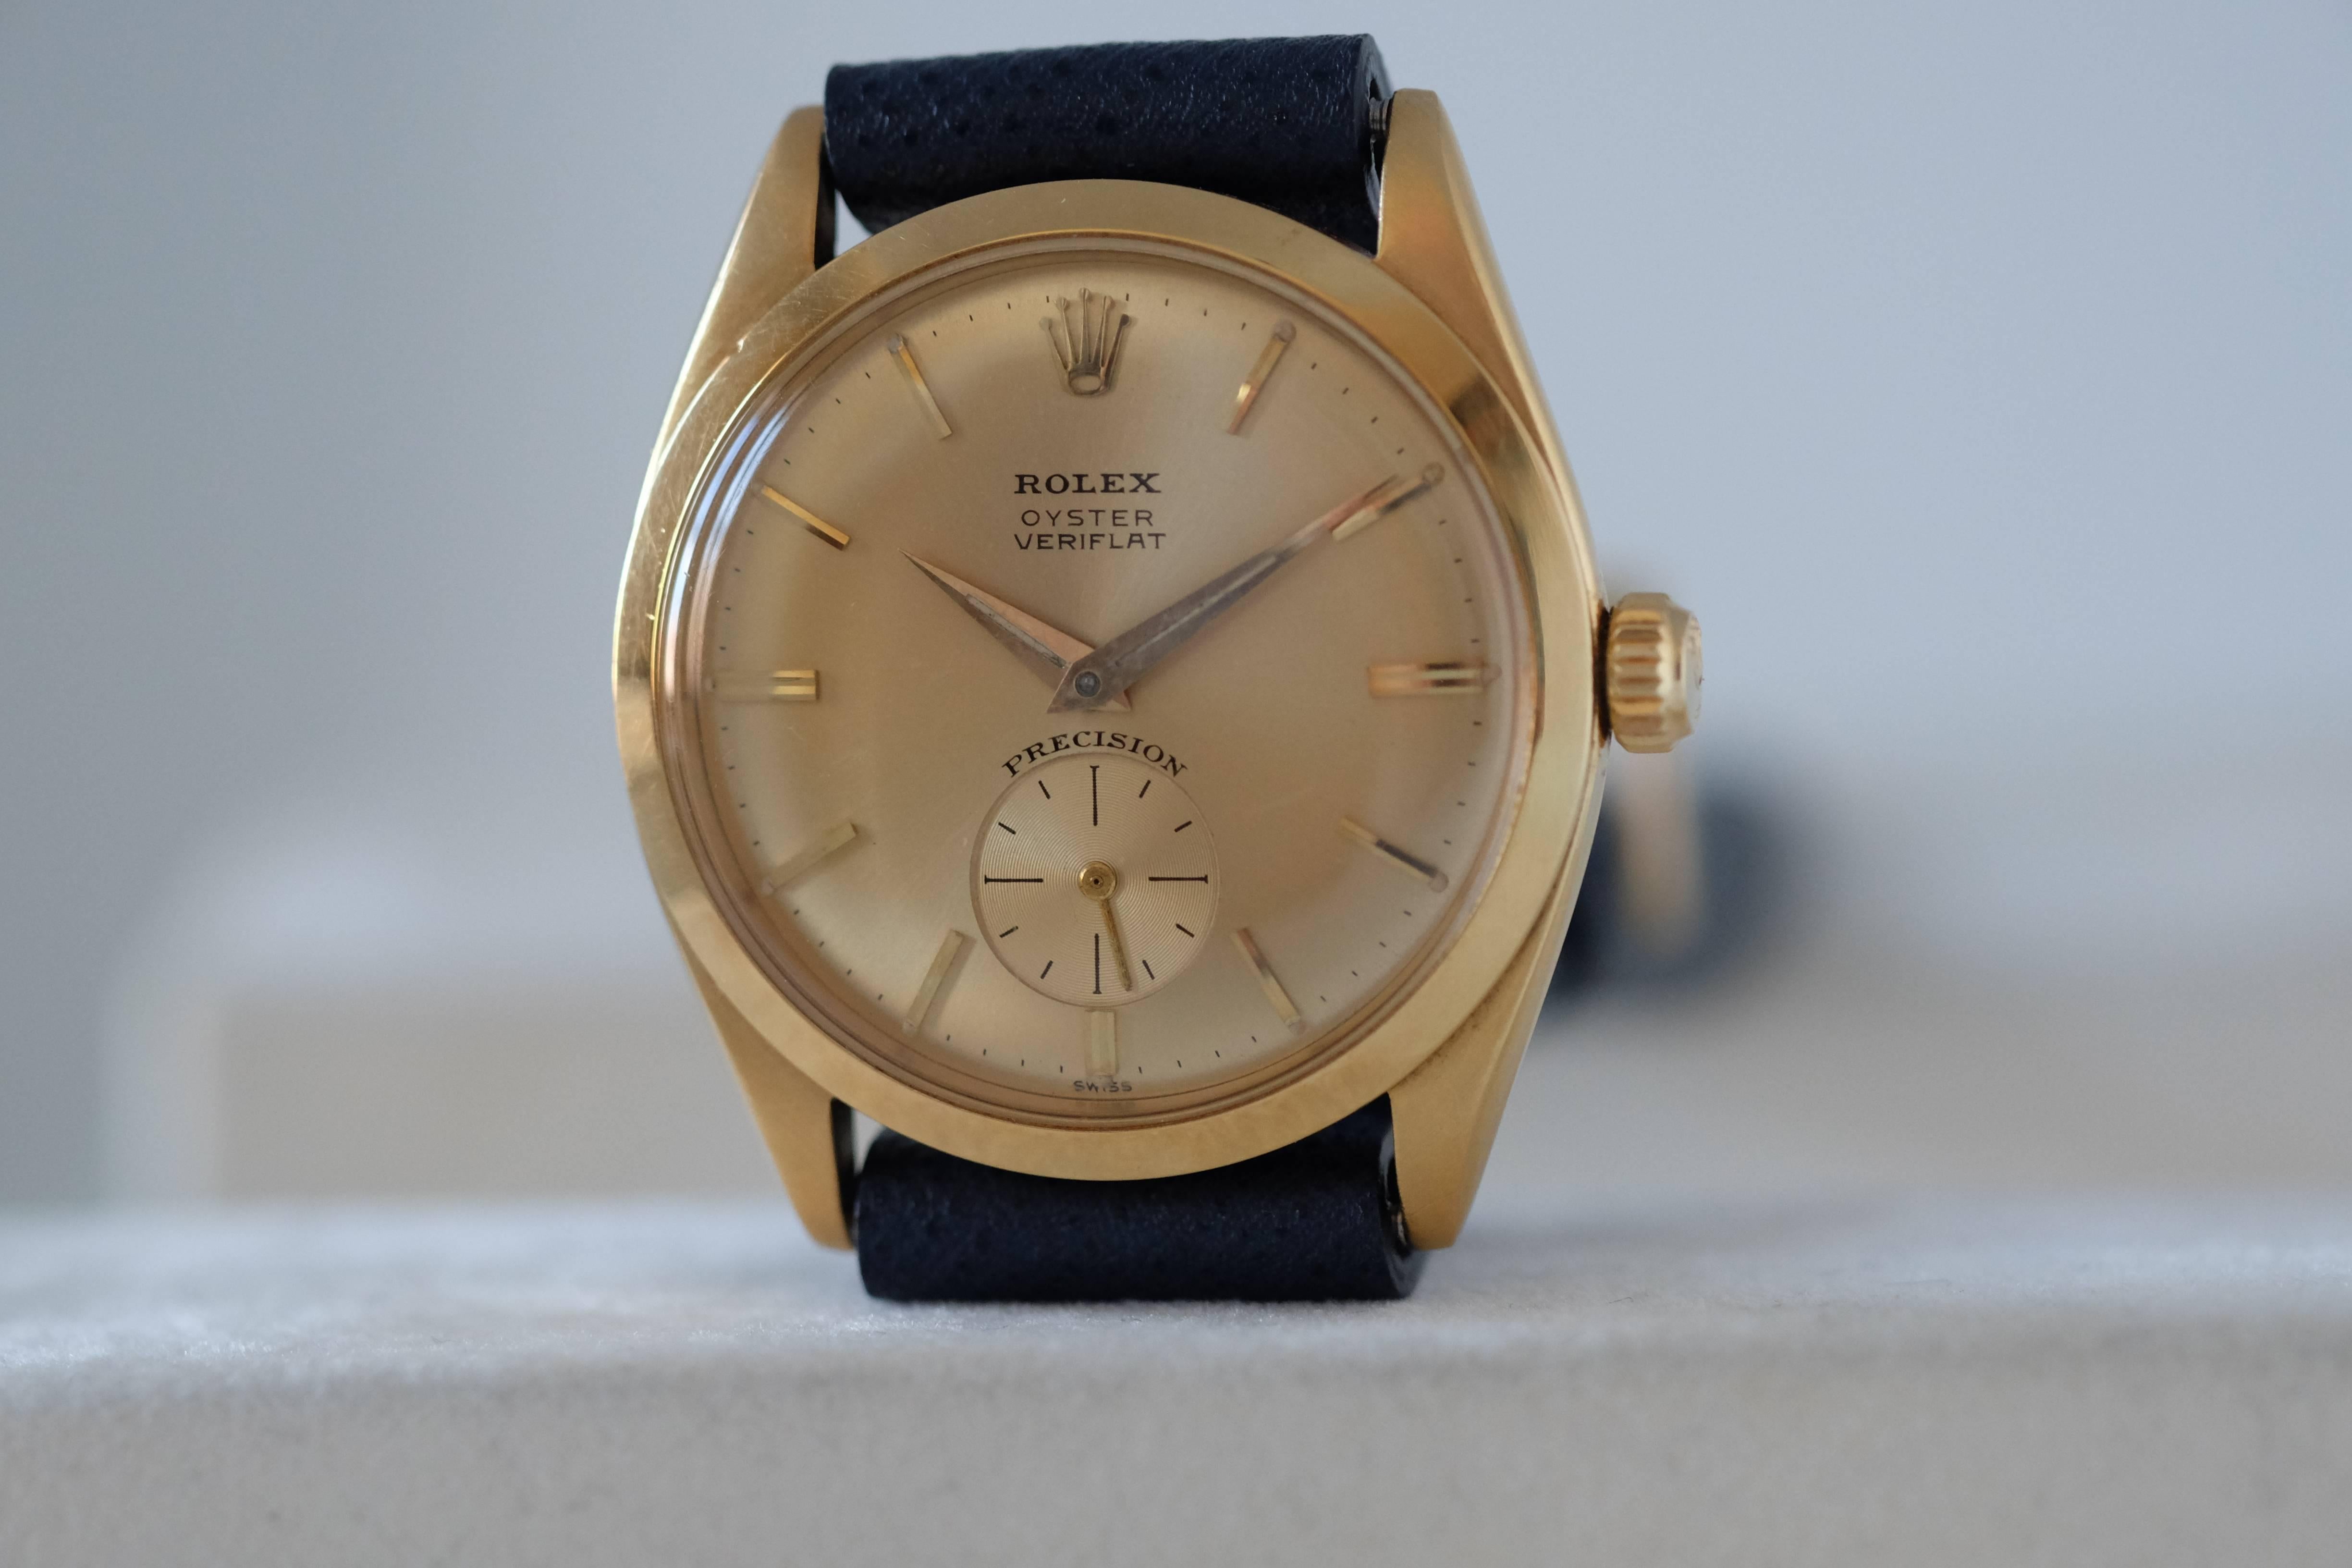 A very rare thin 18k gold Rolex dress watch  

Reference: 6512

Circa: 1950s

Movement: Manual-wind Cal. 1000. Watch is within acceptable COSC timing range

Case: 18k yellow gold, 34mm, with screw-down case back and crown. Case is untouched